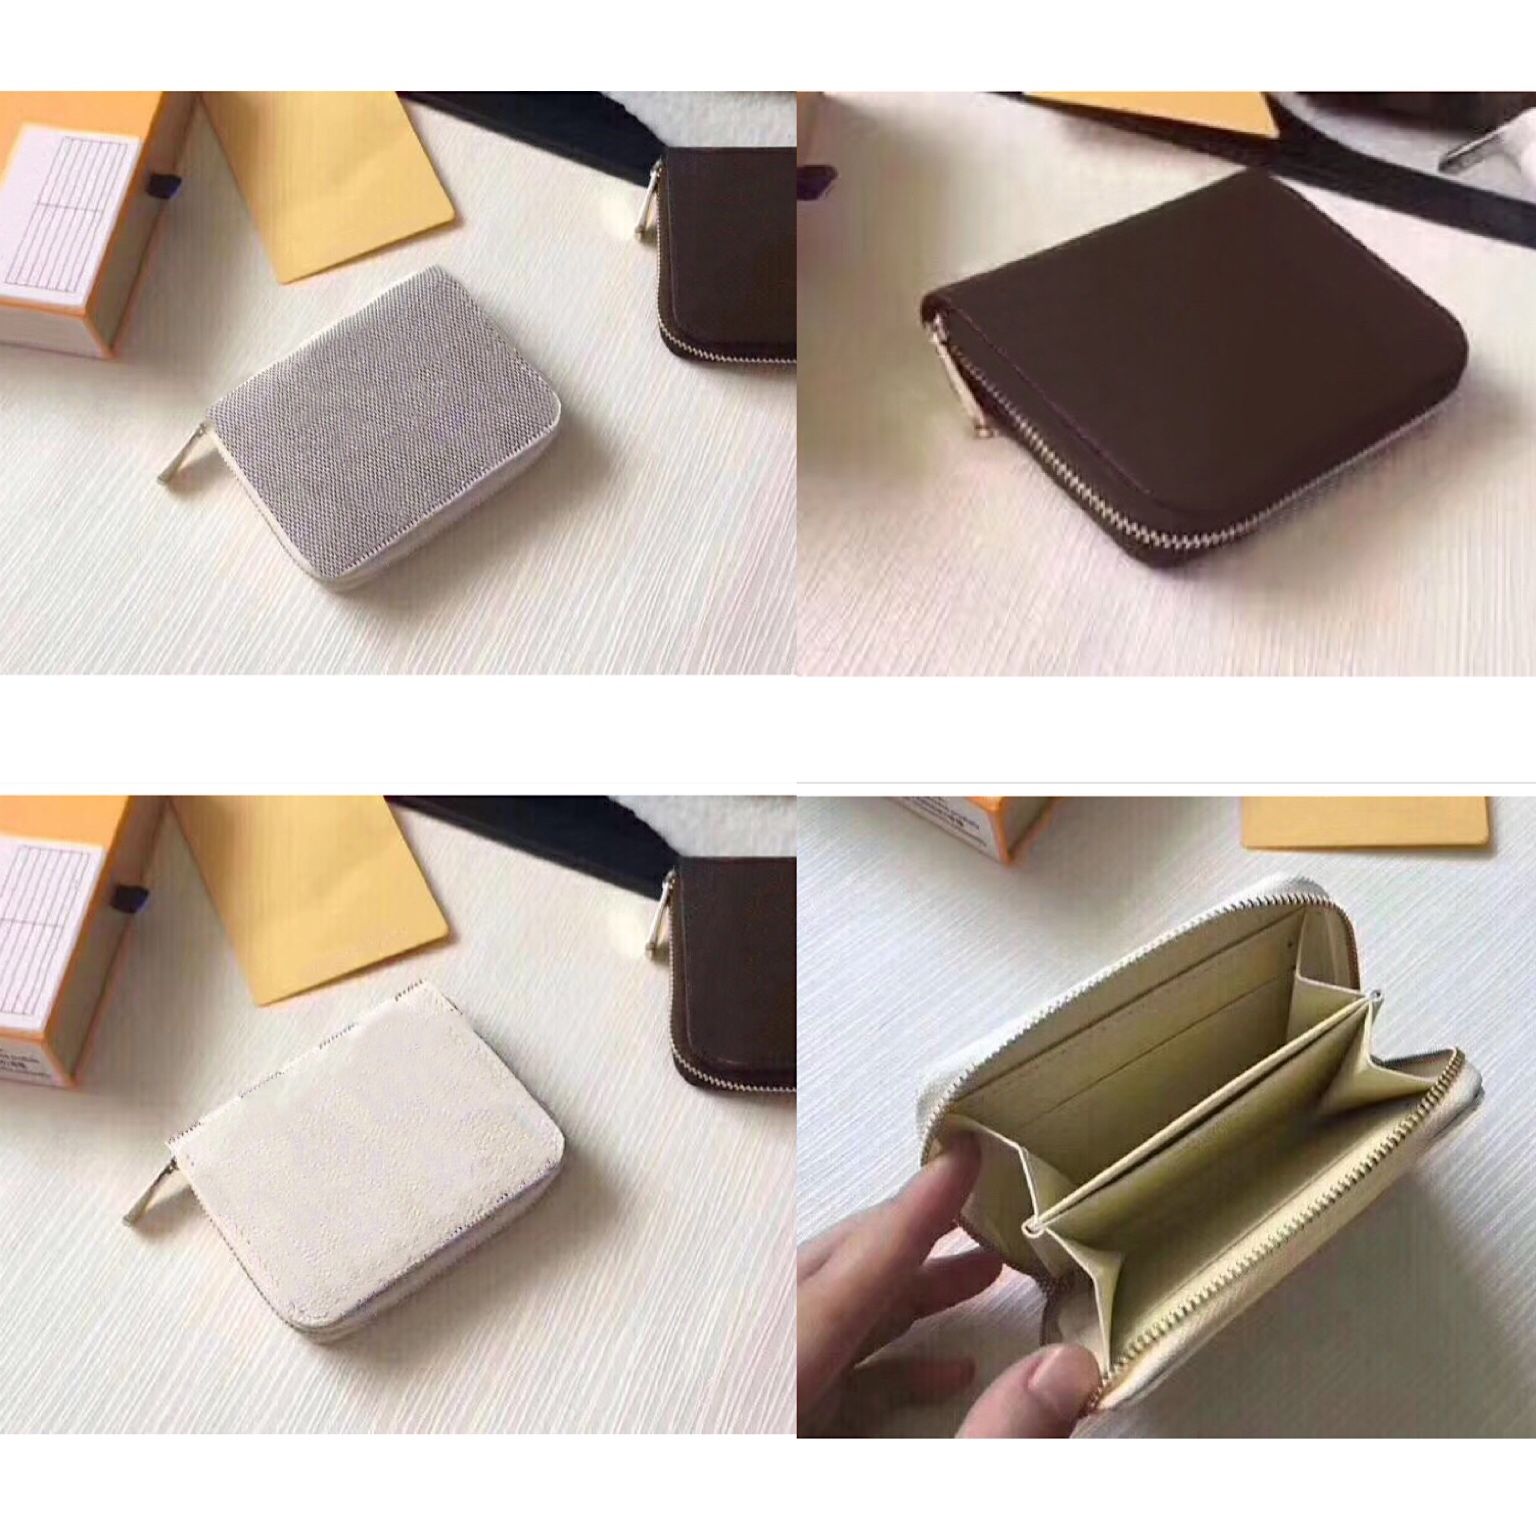 Wholesale Casual Zipper Coin Purse Fashion Short Card Bag Leather Lattice  Mini Wallet Credit Card Clip Pocket Storage Coin Pocket From Moonholder03,  $21.58